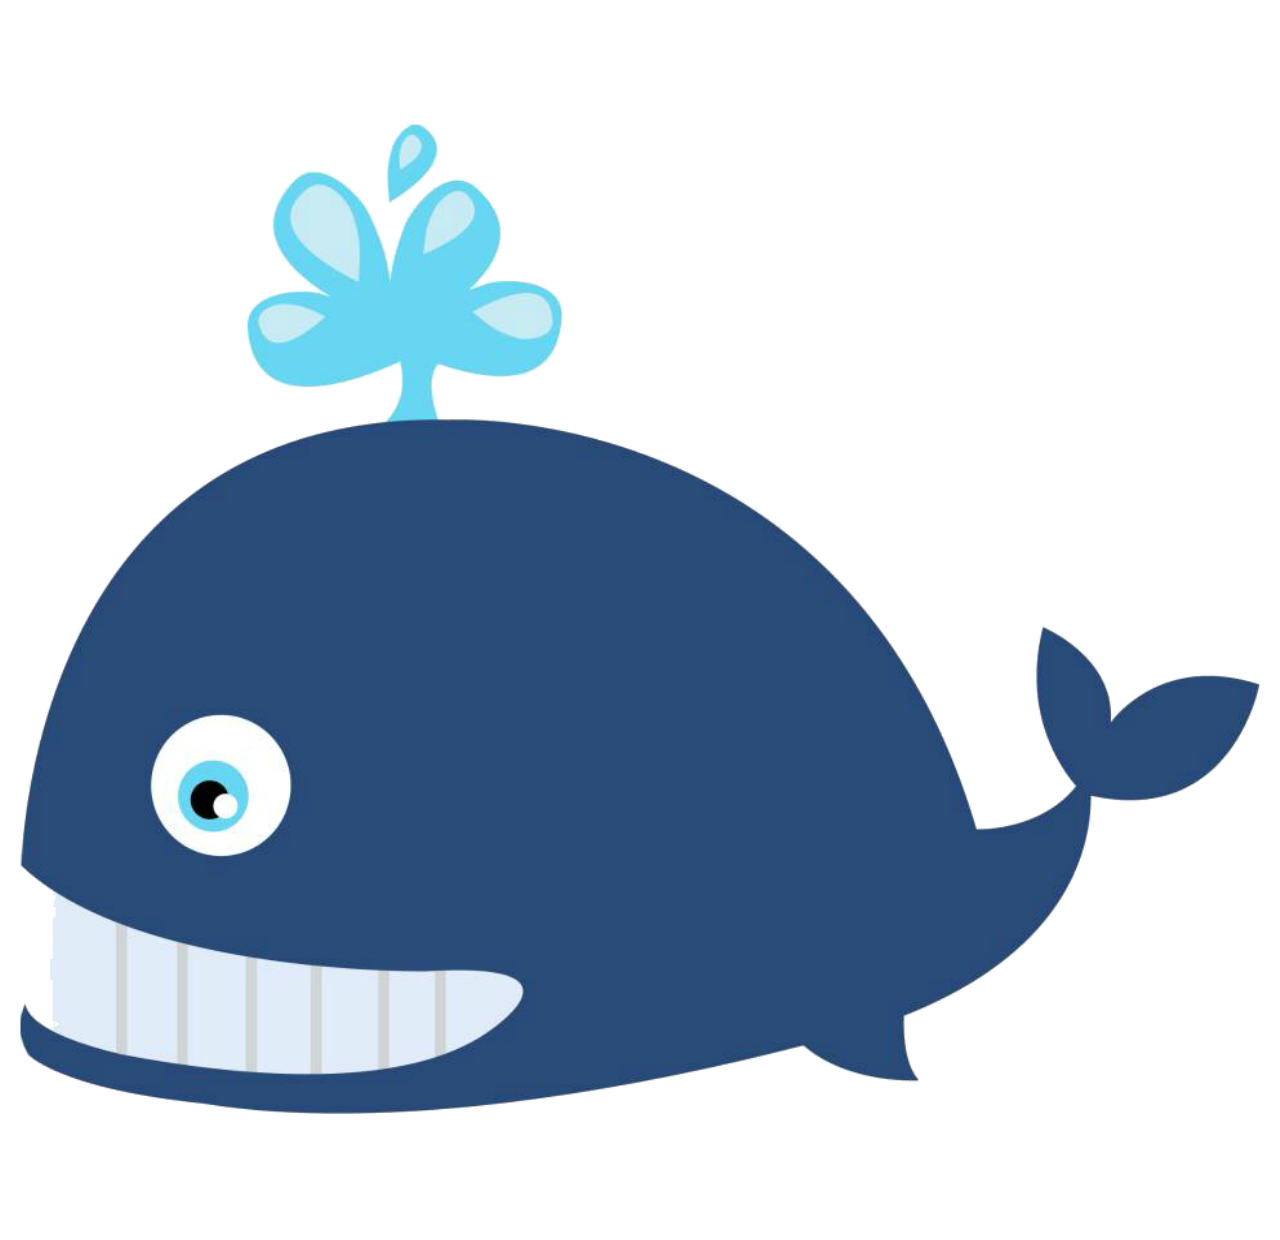 girly clipart whale